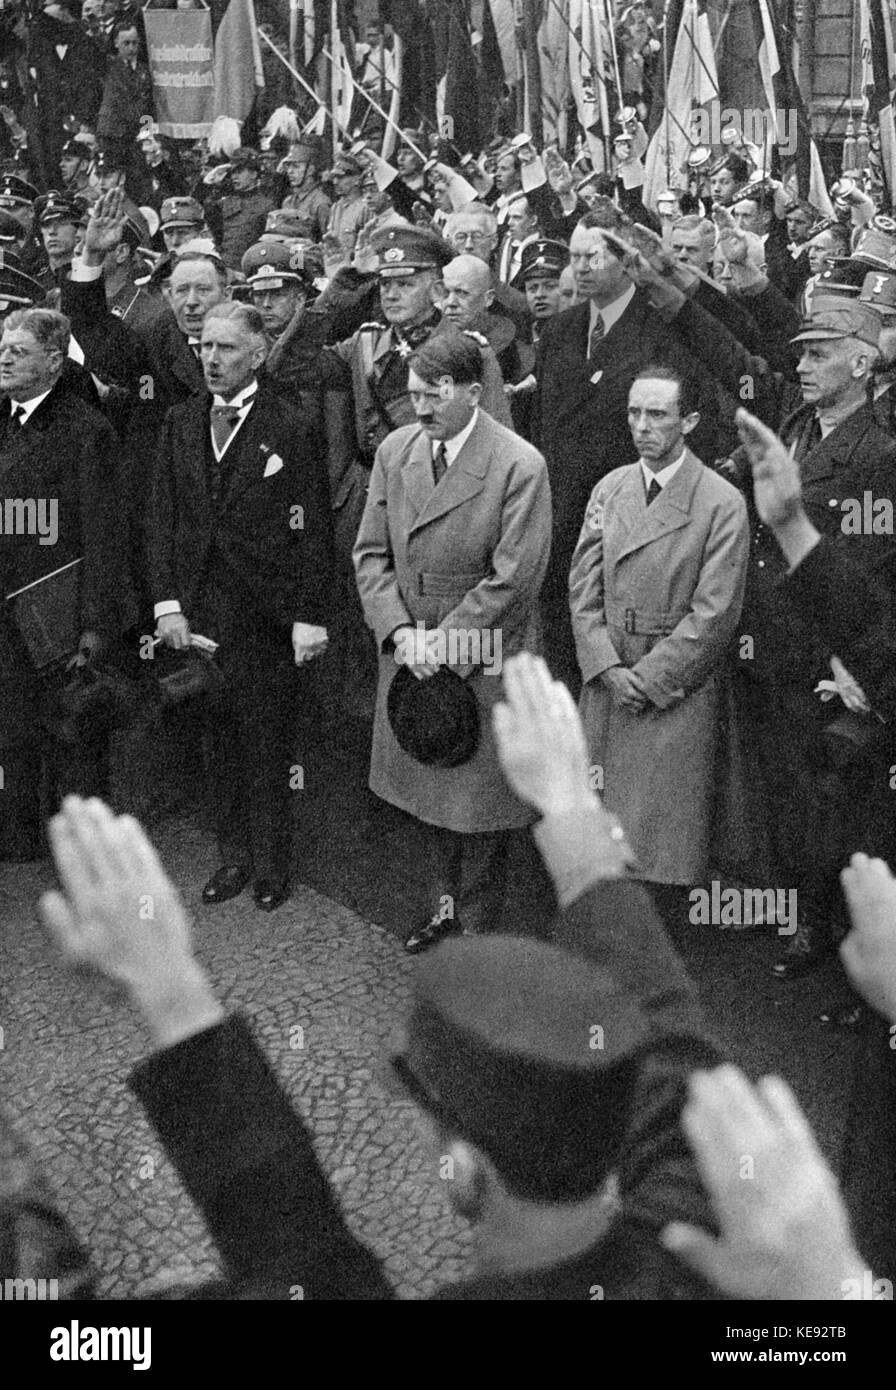 Adolf Hitler (m) with members of the Reich government during the rally of the youth on 1 May 1933 at Berlin Lustgarten. On the right, Propaganda Minister Joseph Goebbels. The 'Tag der Arbeit' (Labor Day) was declared as the 'Feiertag der nationalen Arbeit' (holiday of national labor) on instruction of the Reich government in 1933. | usage worldwide Stock Photo